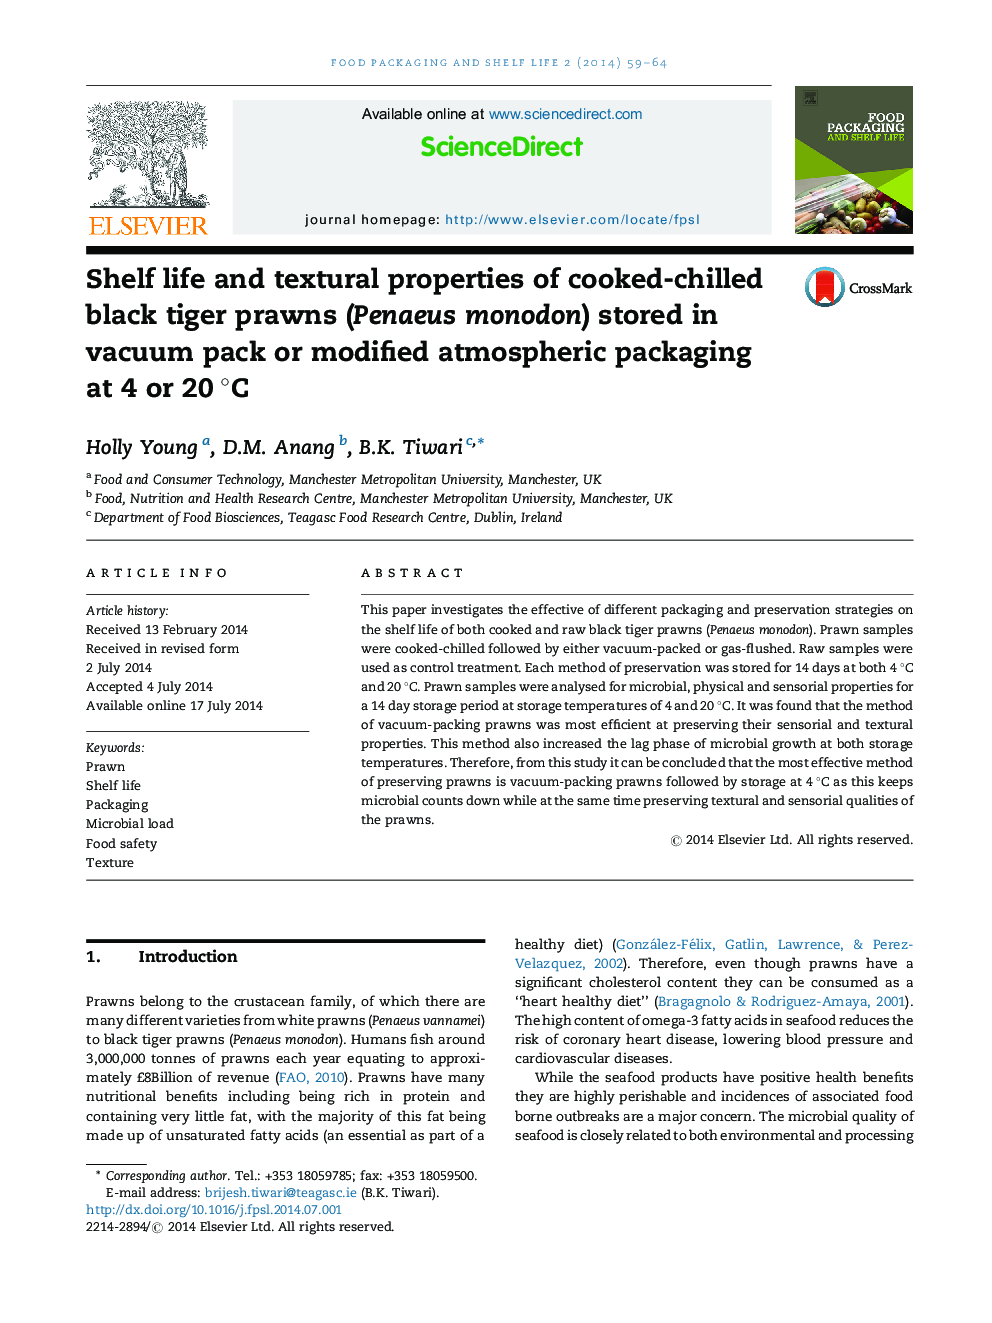 Shelf life and textural properties of cooked-chilled black tiger prawns (Penaeus monodon) stored in vacuum pack or modified atmospheric packaging at 4 or 20 °C